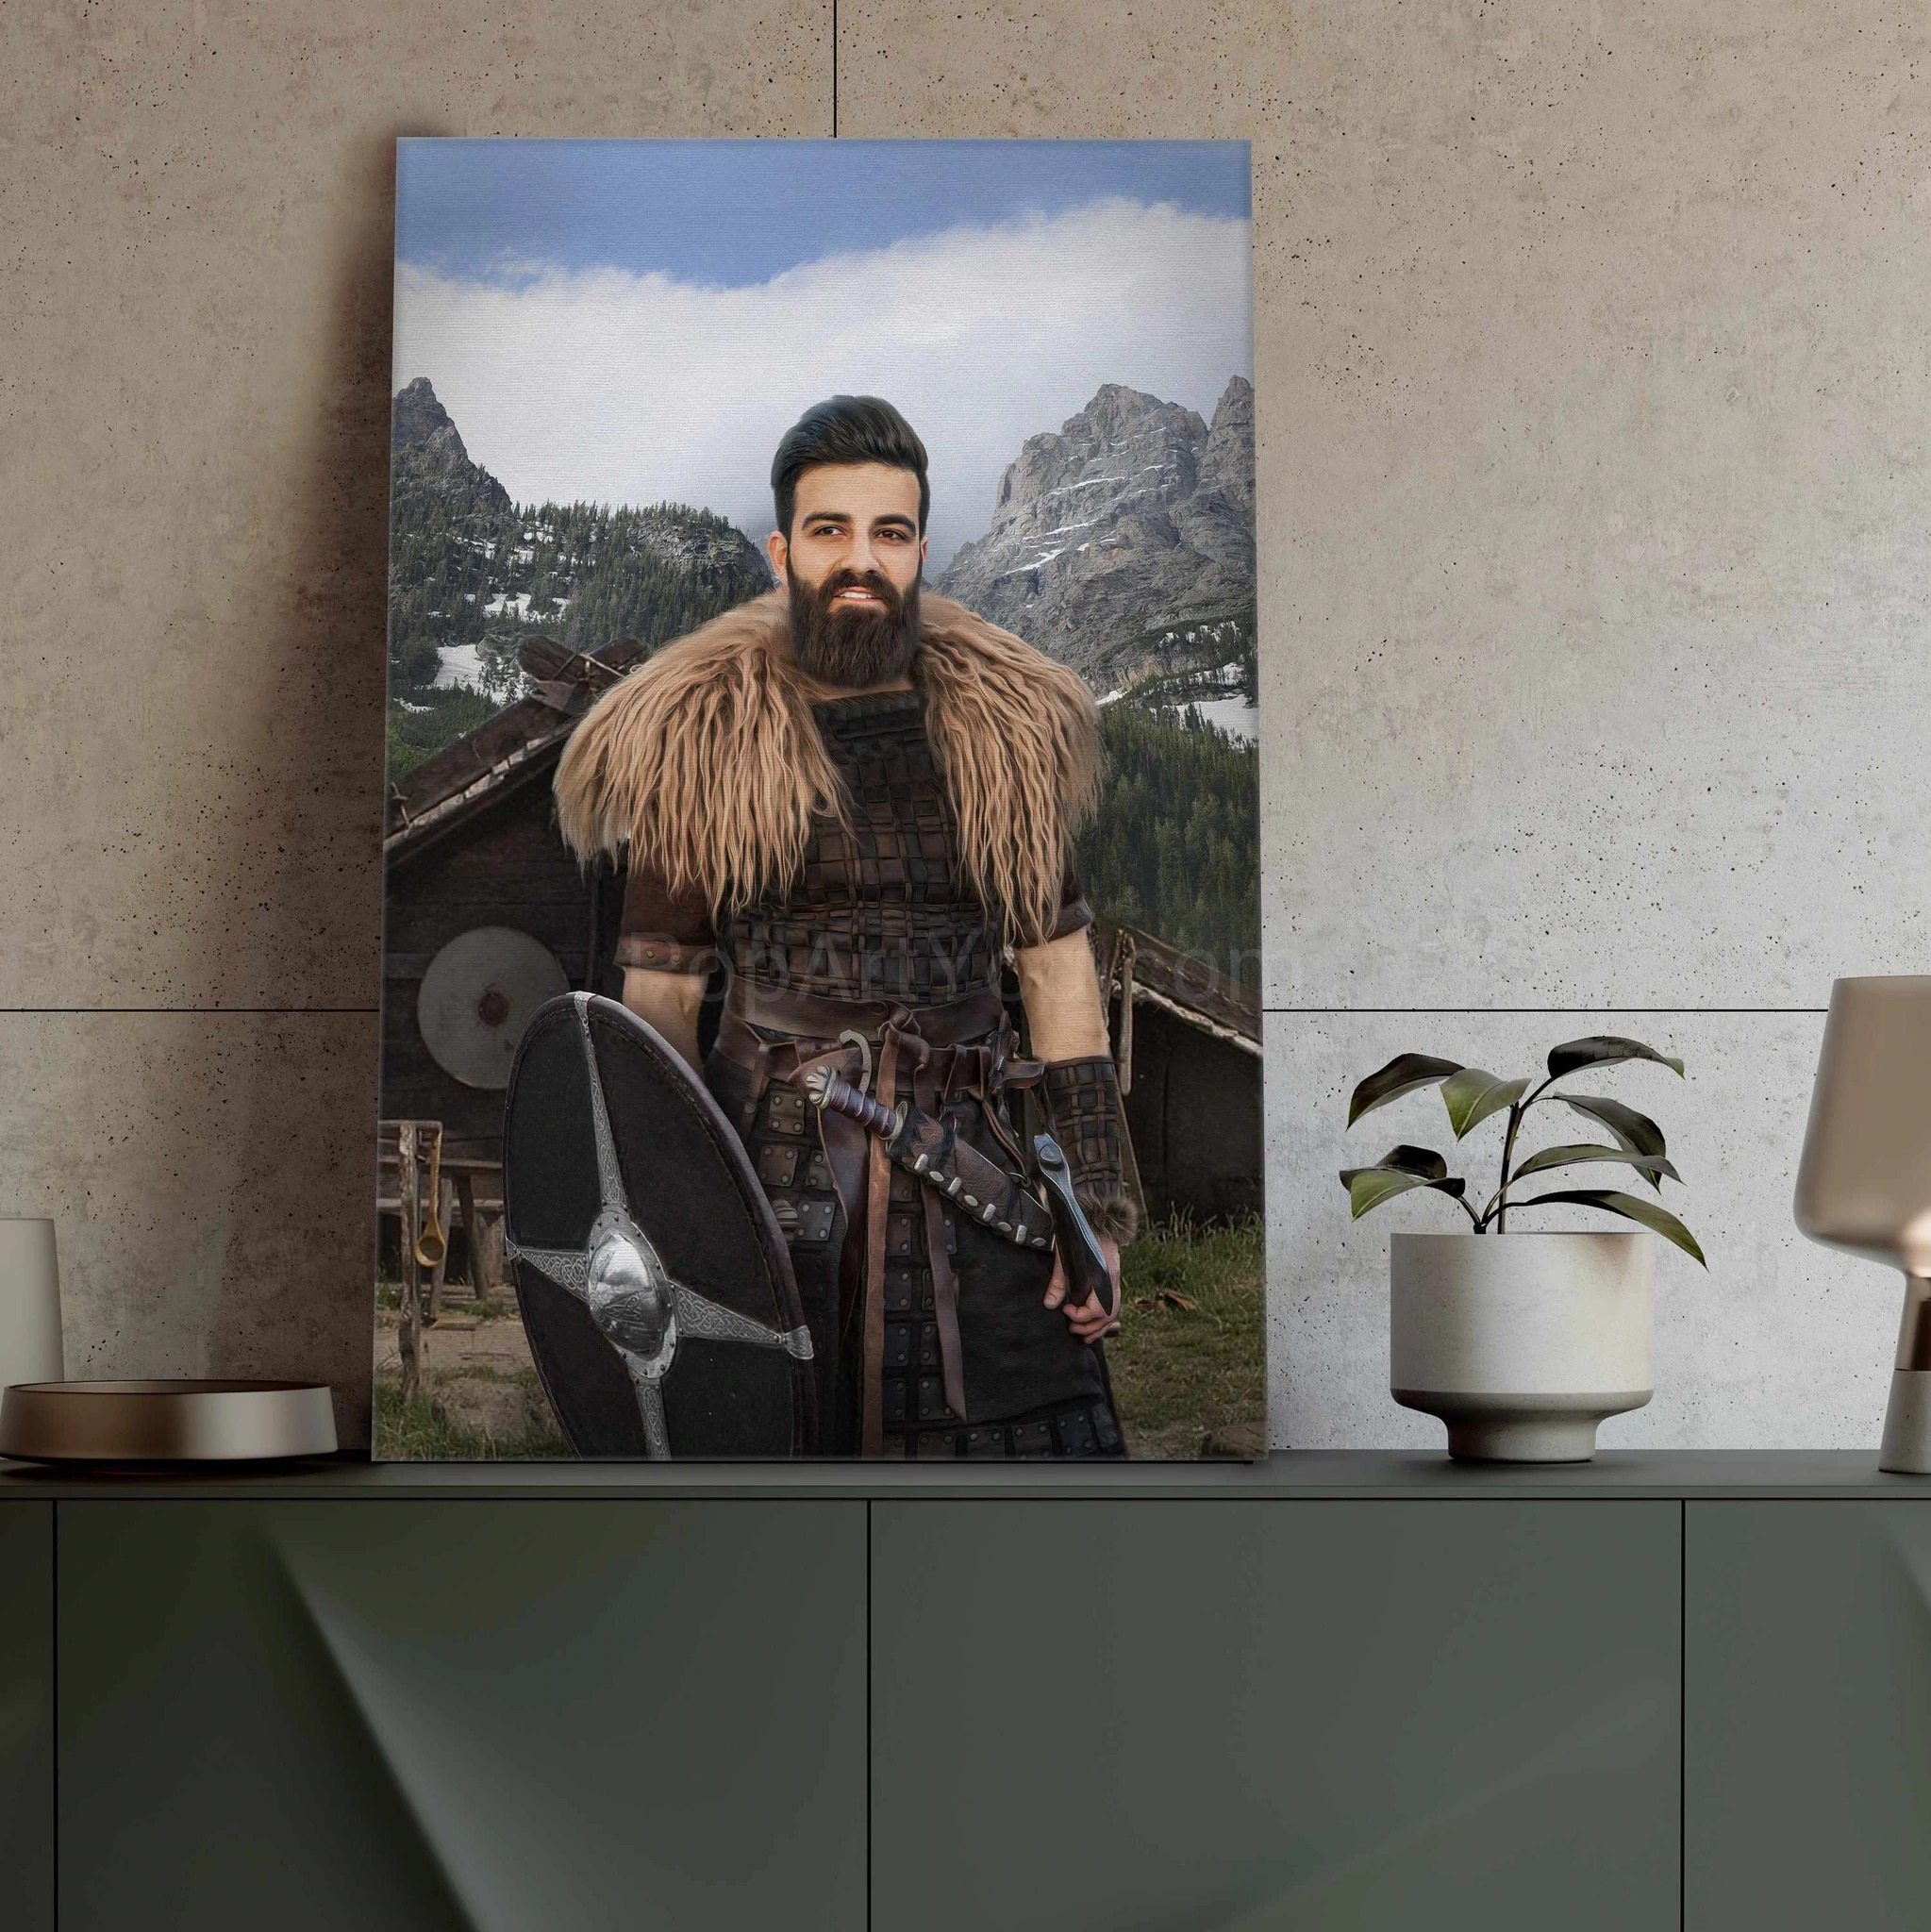 The shield and sword personalized male portrait poster canvas print